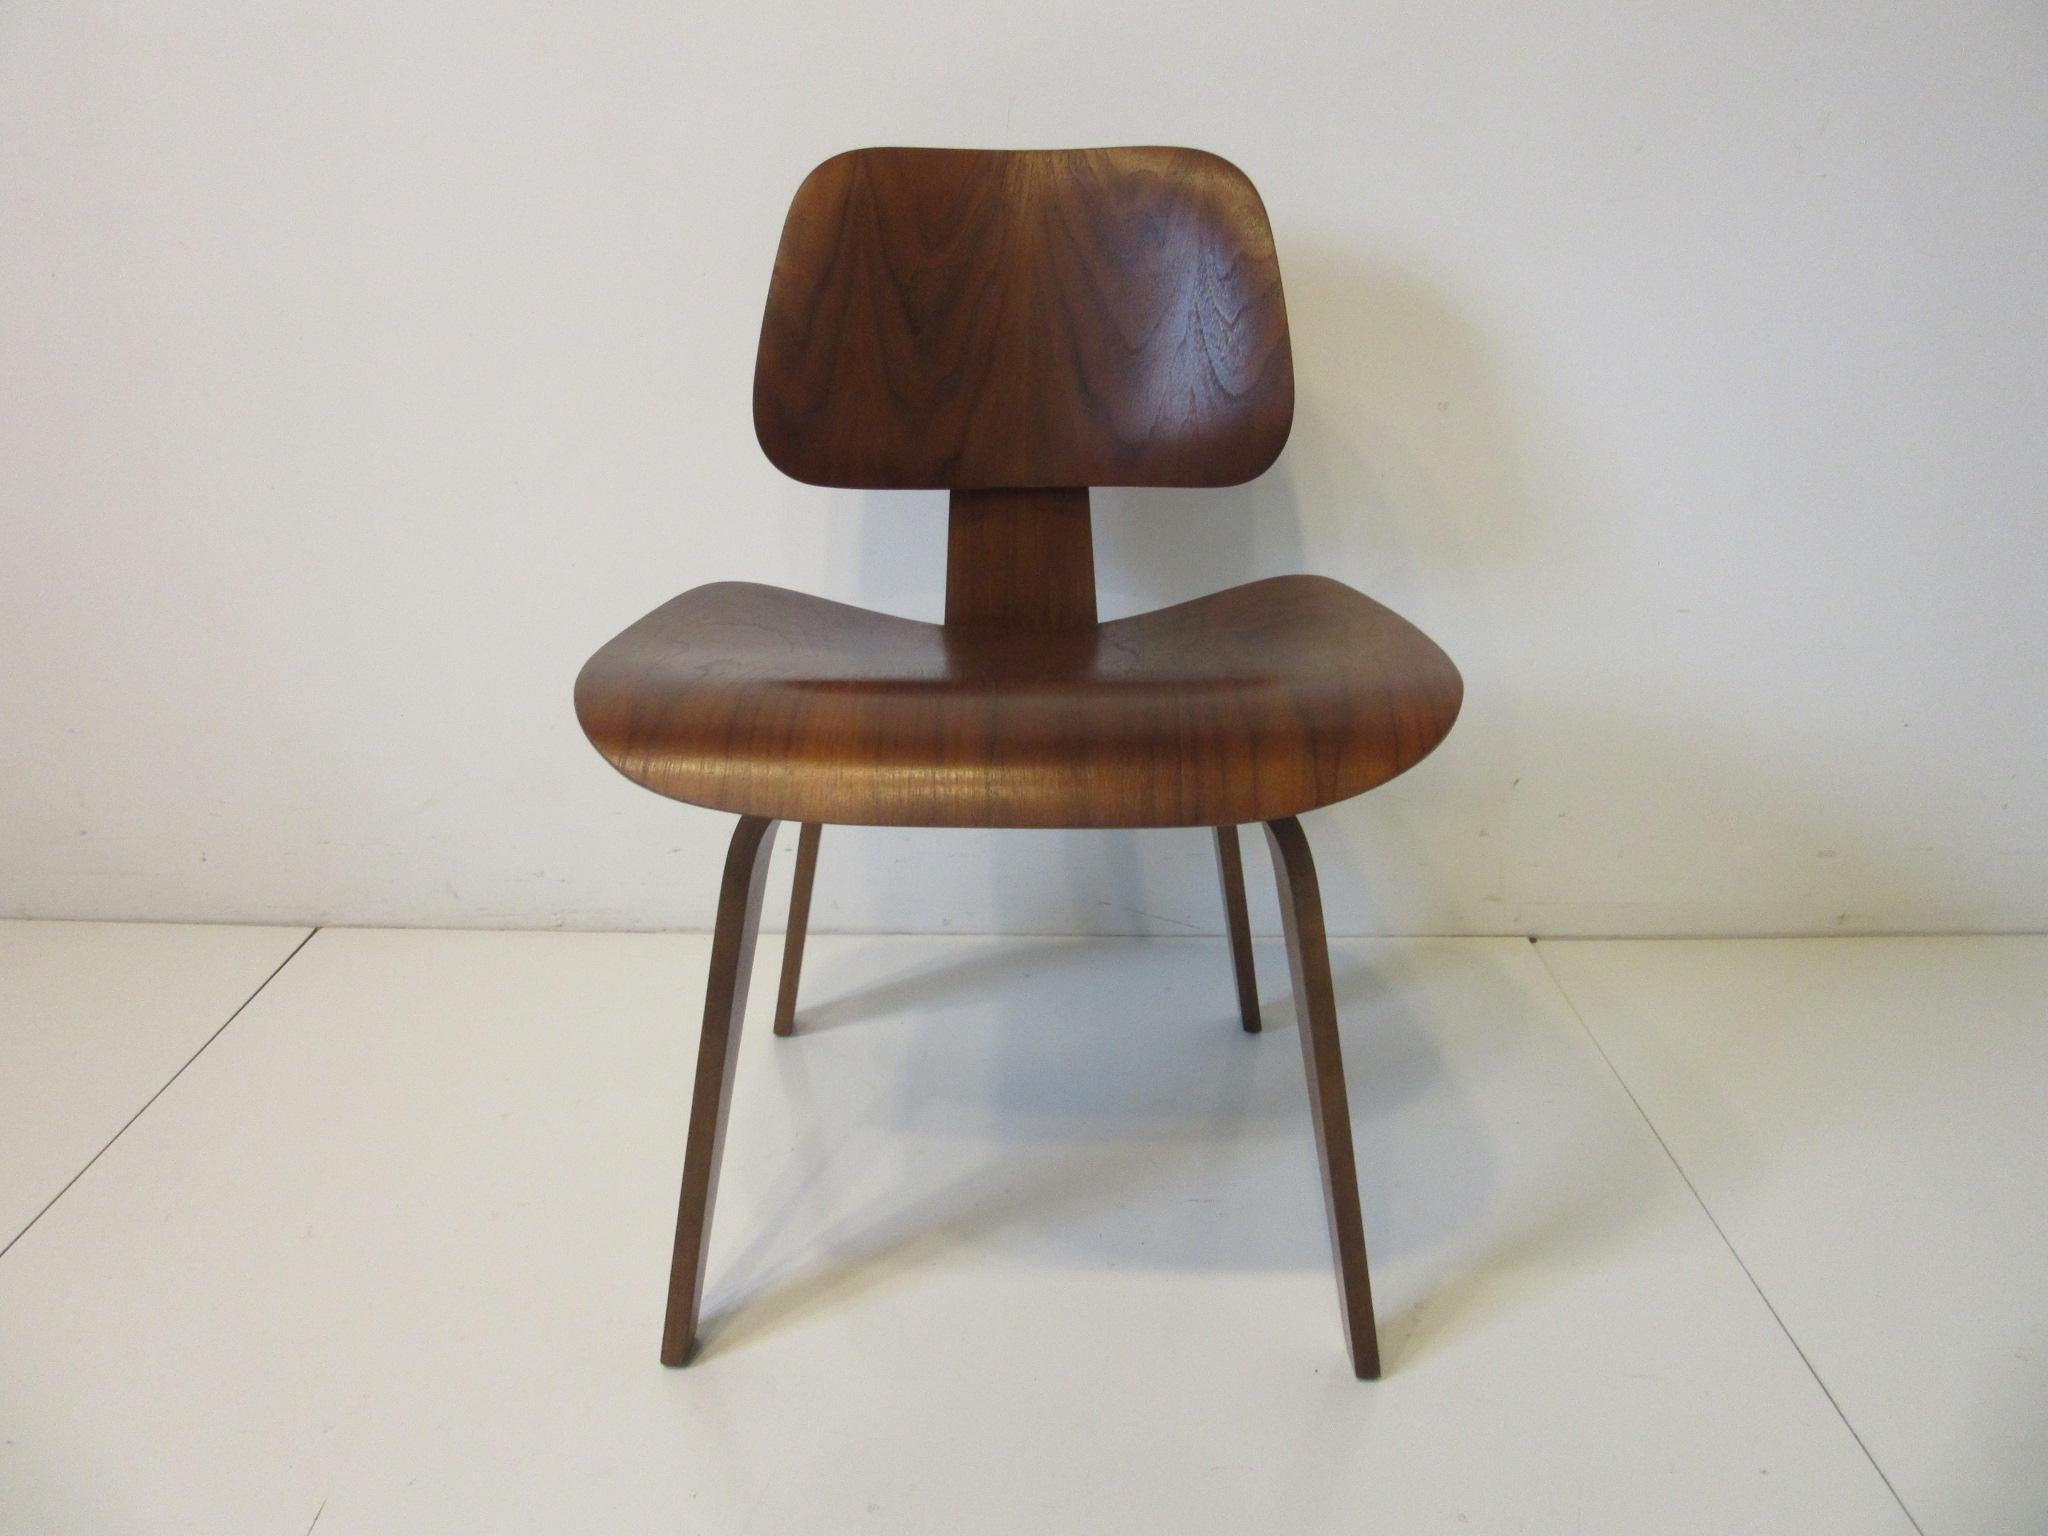 A dark walnut sculptural molded plywood side chair with early five screw configuration to the base constructed in the 1950's this iconic Mid Century design still feels fresh after all these years . Manufactured by the Herman Miller Furniture company